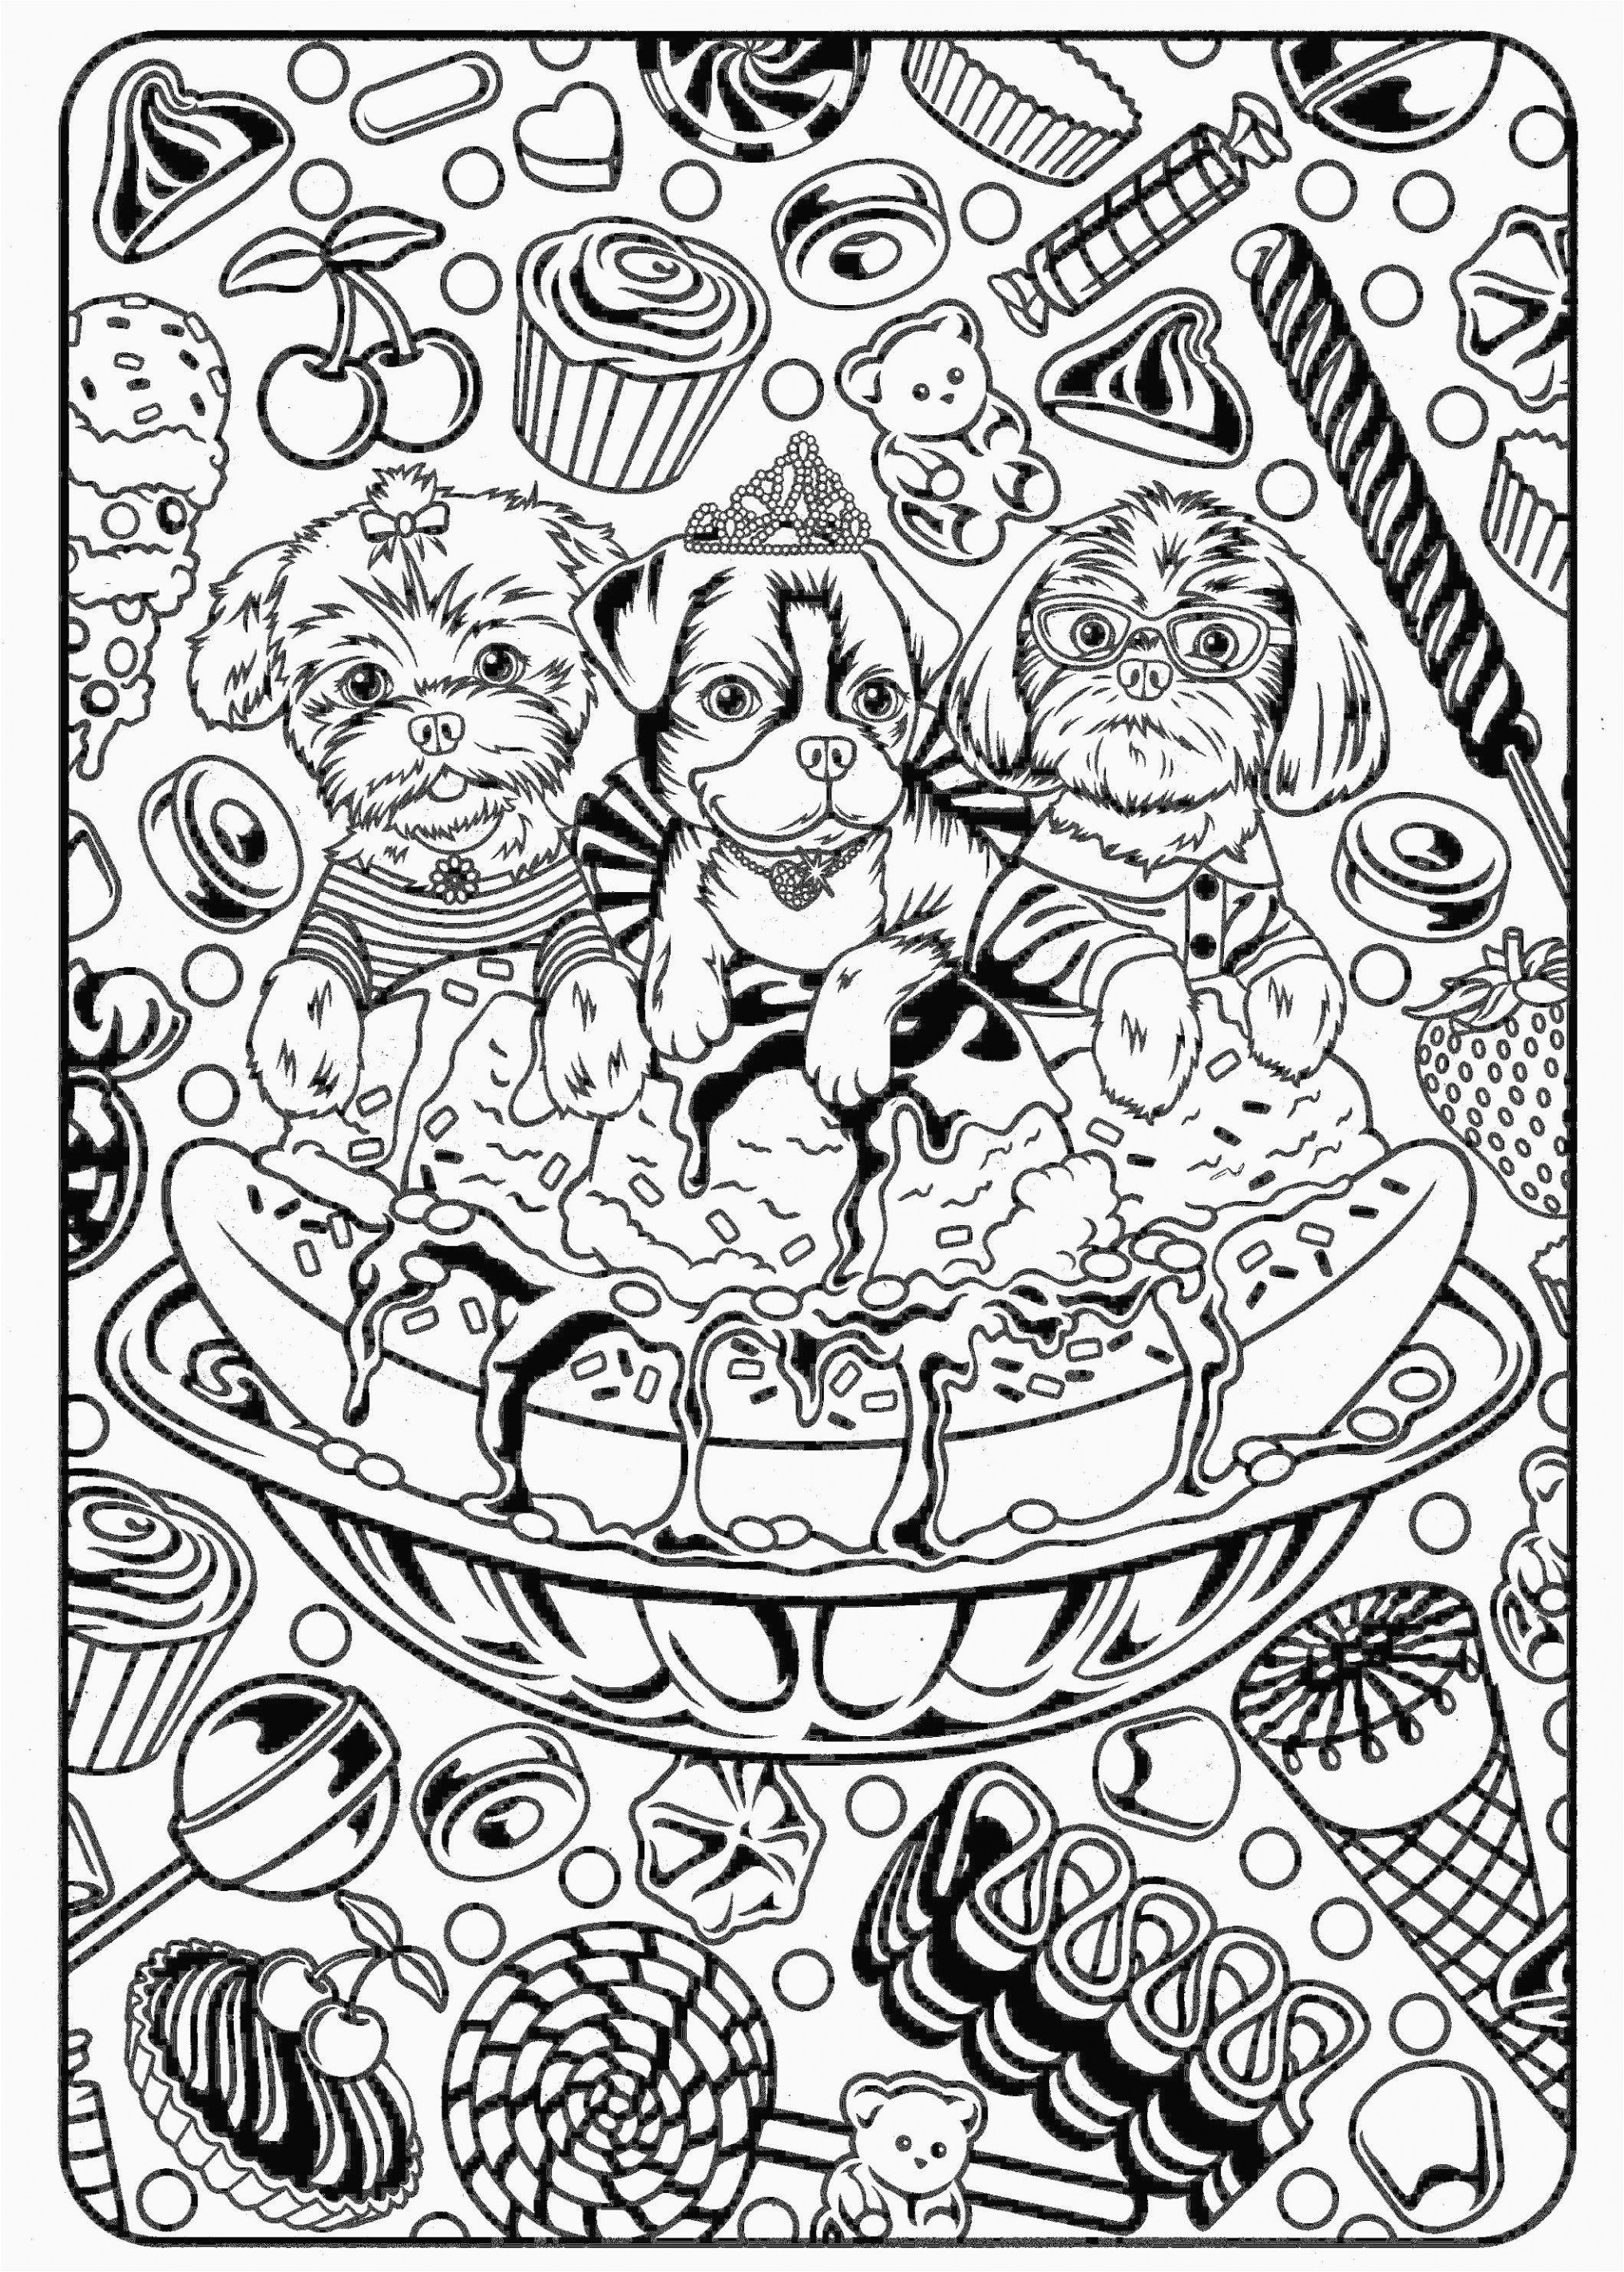 xylophone coloring page coloring books printable popular printable coloring pages for kids awesome coloring printables 0d